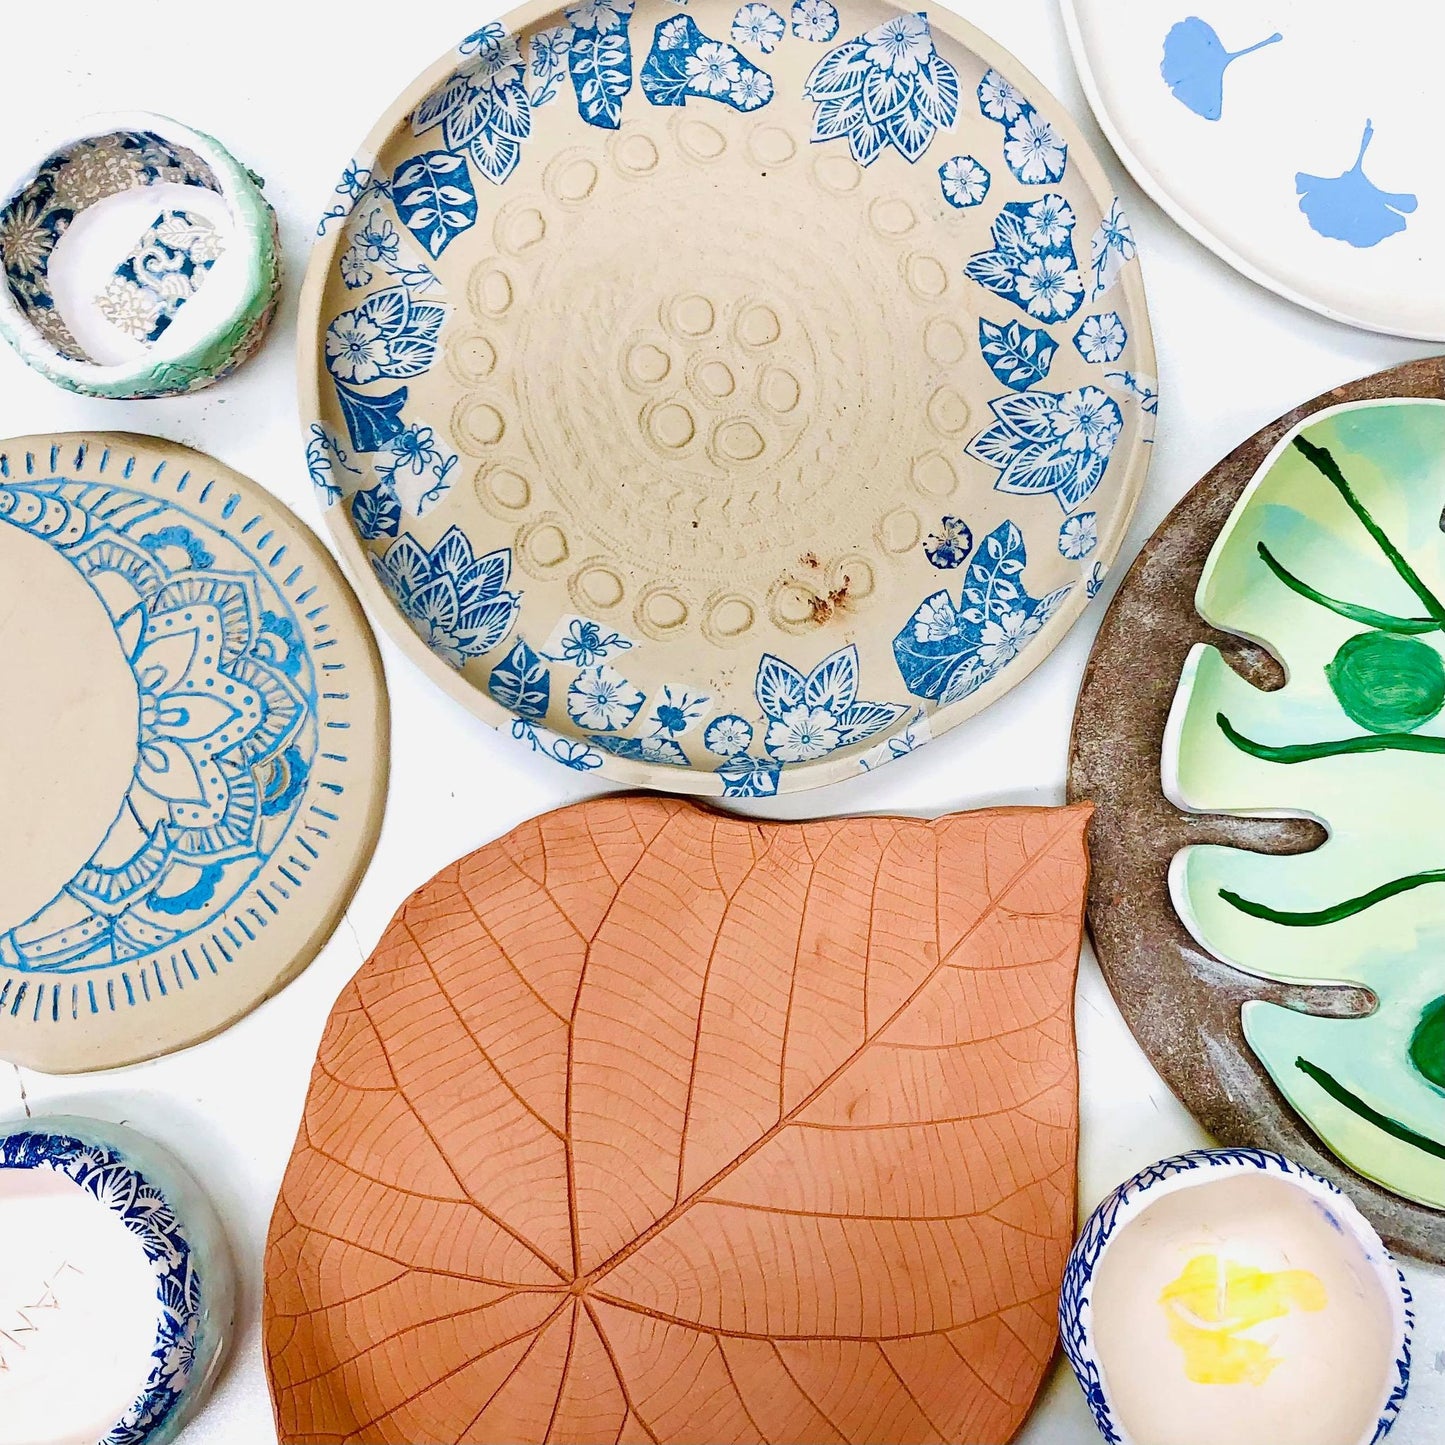 Pottery Platter and Dip Bowl / Or Pottery Windchimes! -  Friday 17th May 6:30-8:30pm